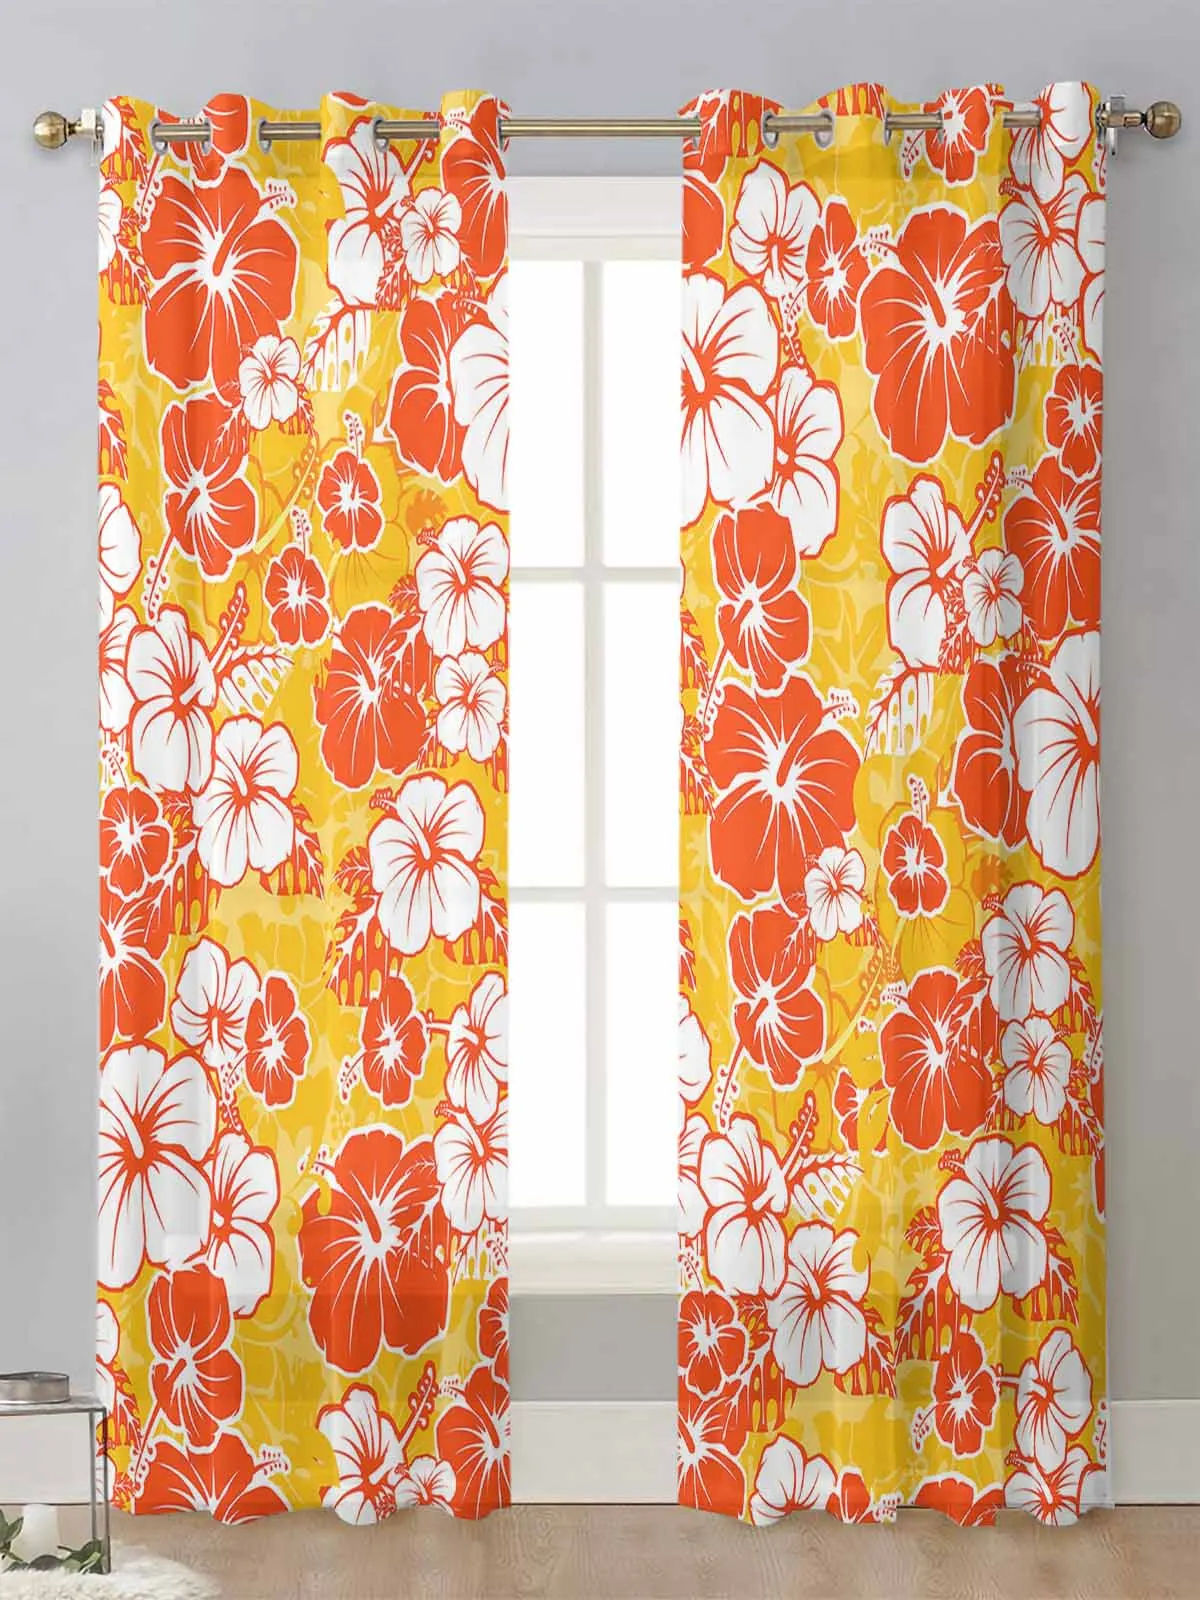 

Hawaiian Tropical Flower Texture Sheer Curtains For Living Room Window Voile Tulle Curtain Cortinas Drapes Home Decor